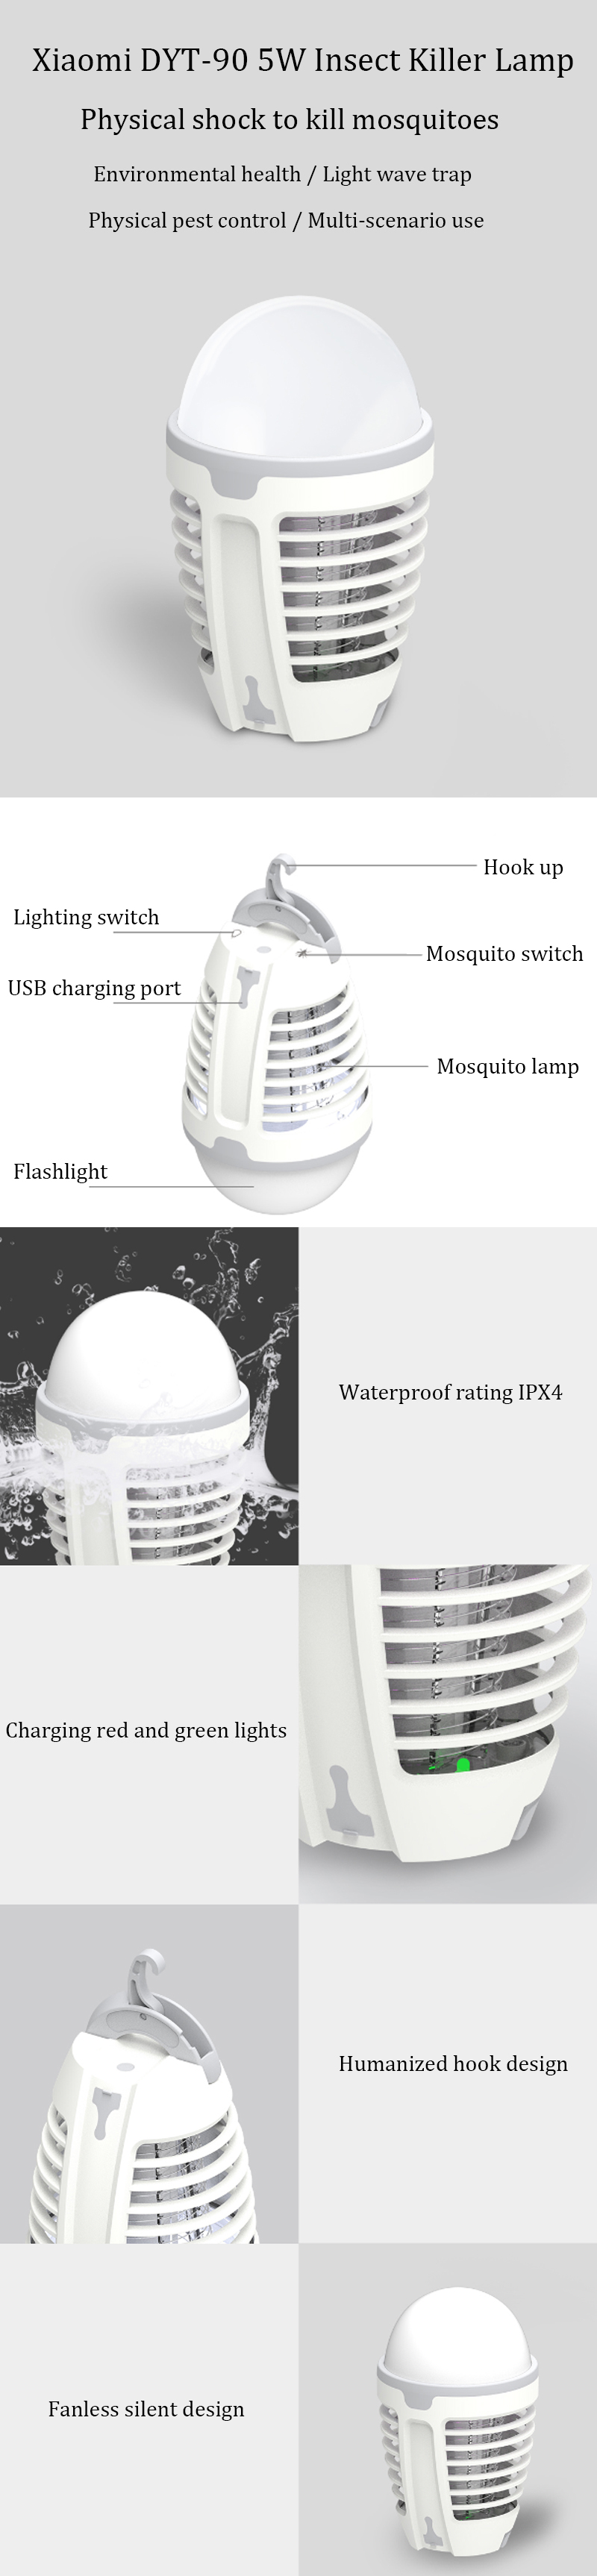 Xiaomi DYT-90 5W LED USB Mosquito Dispeller Repeller Mosquito Killer Lamp Bulb Electric Bug Insect Zapper Pest Trap Light Outdoor Camping 13